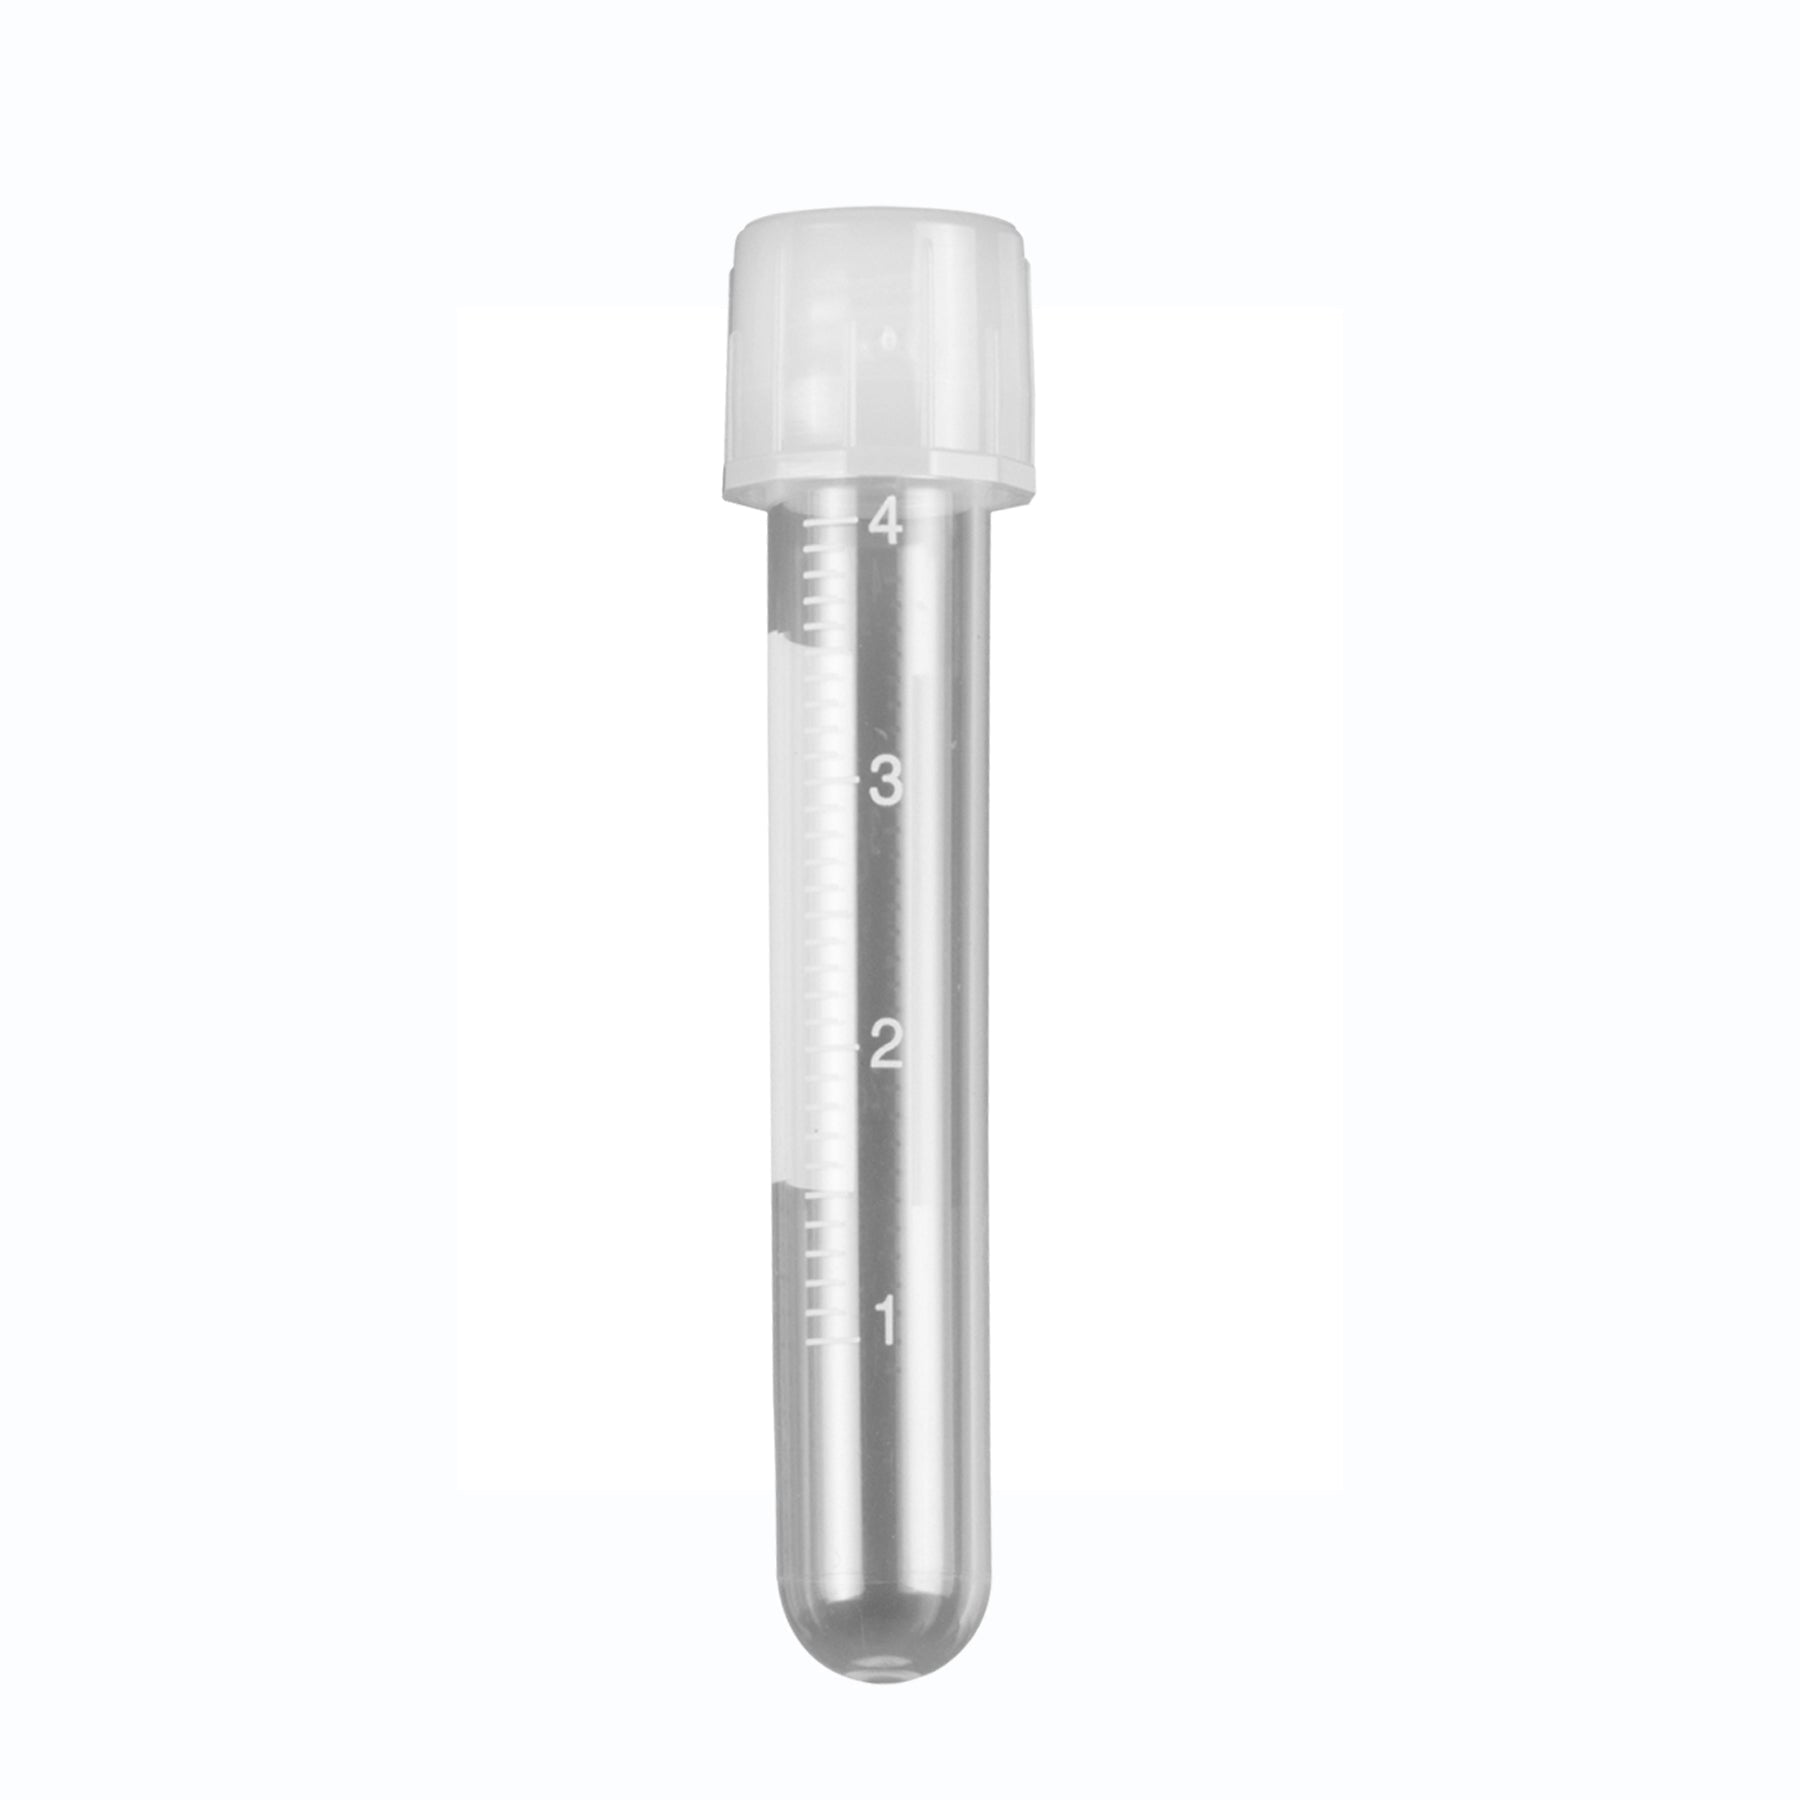 MTC Bio T8741 Culture Tube, 5mL, 12 x 75mm, PS, w/ attached 2-position screw-cap, printed graduations, sterile, 20 bags of 25 tubes